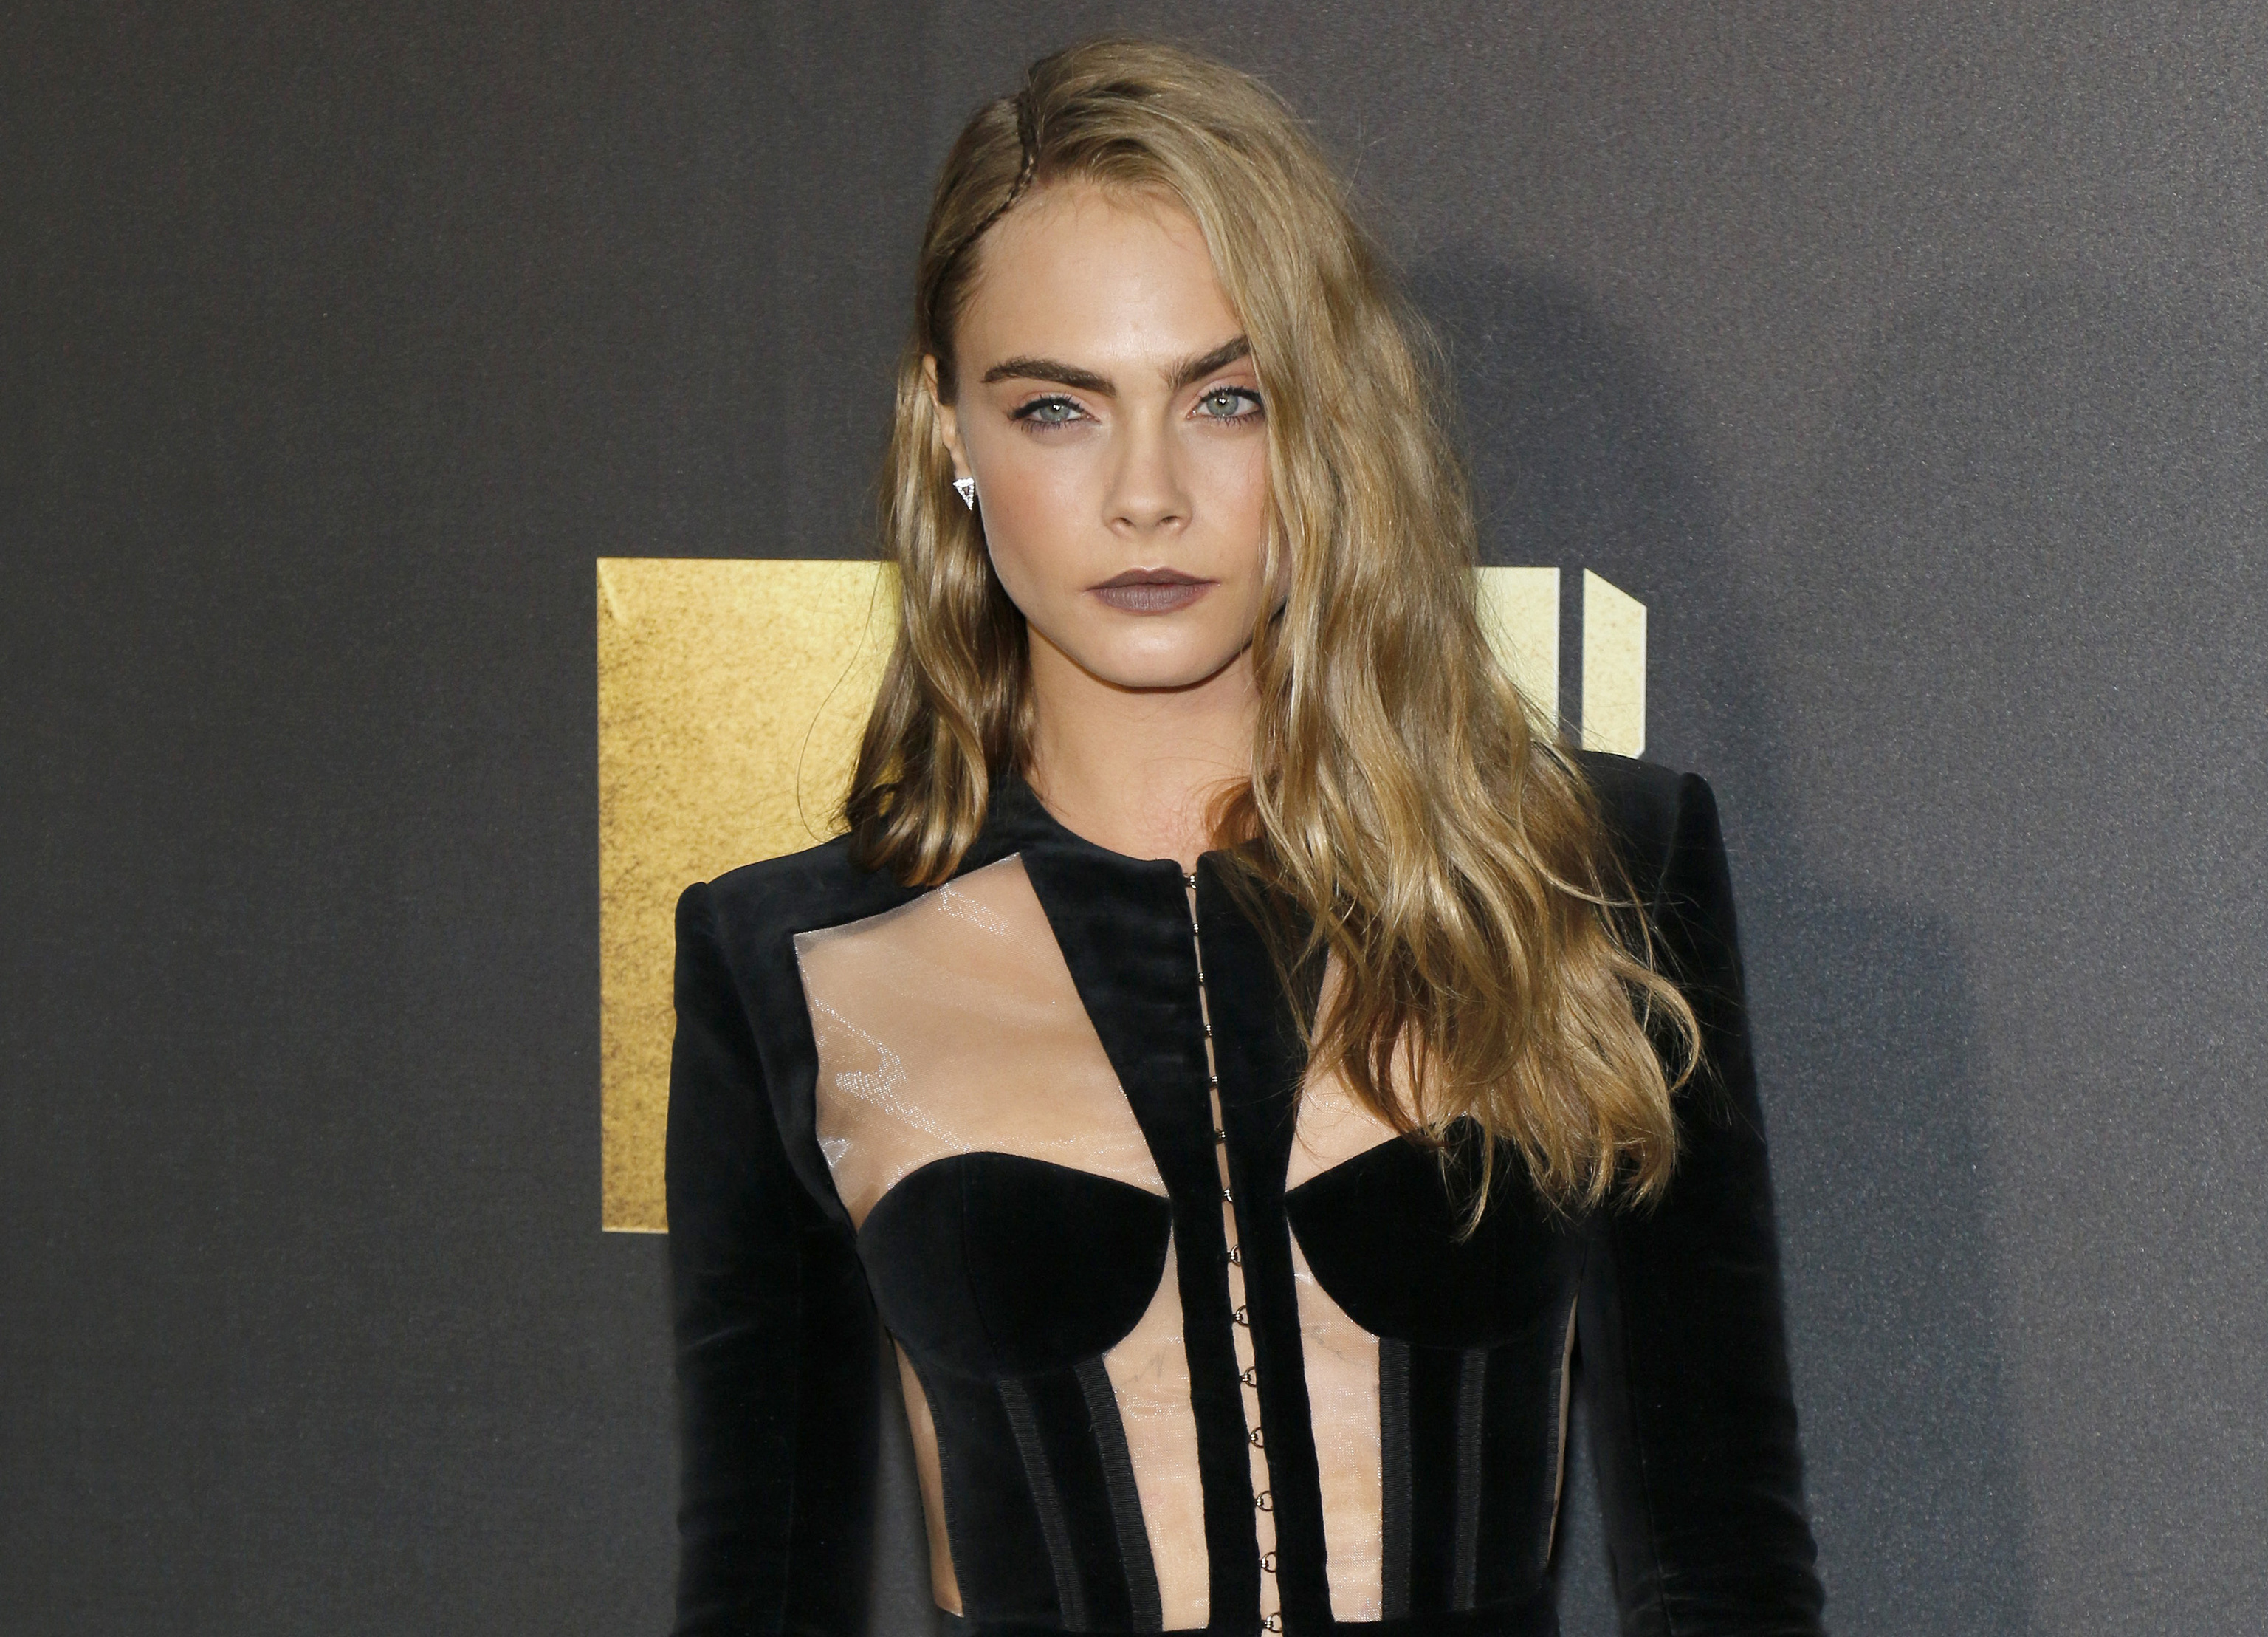 Cara Delevingne is set to make her West End debut in 'Cabaret'.
The model-turned-actress will play the part of Sally Bowles at the Playhouse theatre in London from March 11.
Cara, 31 - who will appear alongside Luke Treadaway in the production - said: "There are no words to explain the excitement I have to return home to make my stage debut in such an iconic role.
"I am so inspired by the brilliant actors who have played Sally in past productions around the world and in this one in the West End.
"I cannot wait to be a part of this brilliant cast and production."
Luke is also excited to star in the production in London.
The award-winning actor said: "I can't wait to become a member of the Kit Kat Club and join this extraordinary production.
"It's a huge thrill to be asked to take this on and I'm very excited to get started."
Cara will appear in 'Cabaret' from March 11 to June 1. However, the production is already accepting bookings until February 2025.
Cara has previously enjoyed huge success as a model, working with brands such as Tommy Hilfiger and Marc Jacobs. However, she always harboured the ambition of becoming a successful actress.
The London-born star previously told GQ magazine: "As a really small child I always wanted to be an actress. And I wanted to be a musician. 
"But going to school with all these incredibly talented people I was like, 'I have no chance.' I still did it, because I loved it, but I didn't ever think I'd do this. That's why I'm so happy that I modelled. I wouldn't have made it into acting or music if I hadn't modelled first."